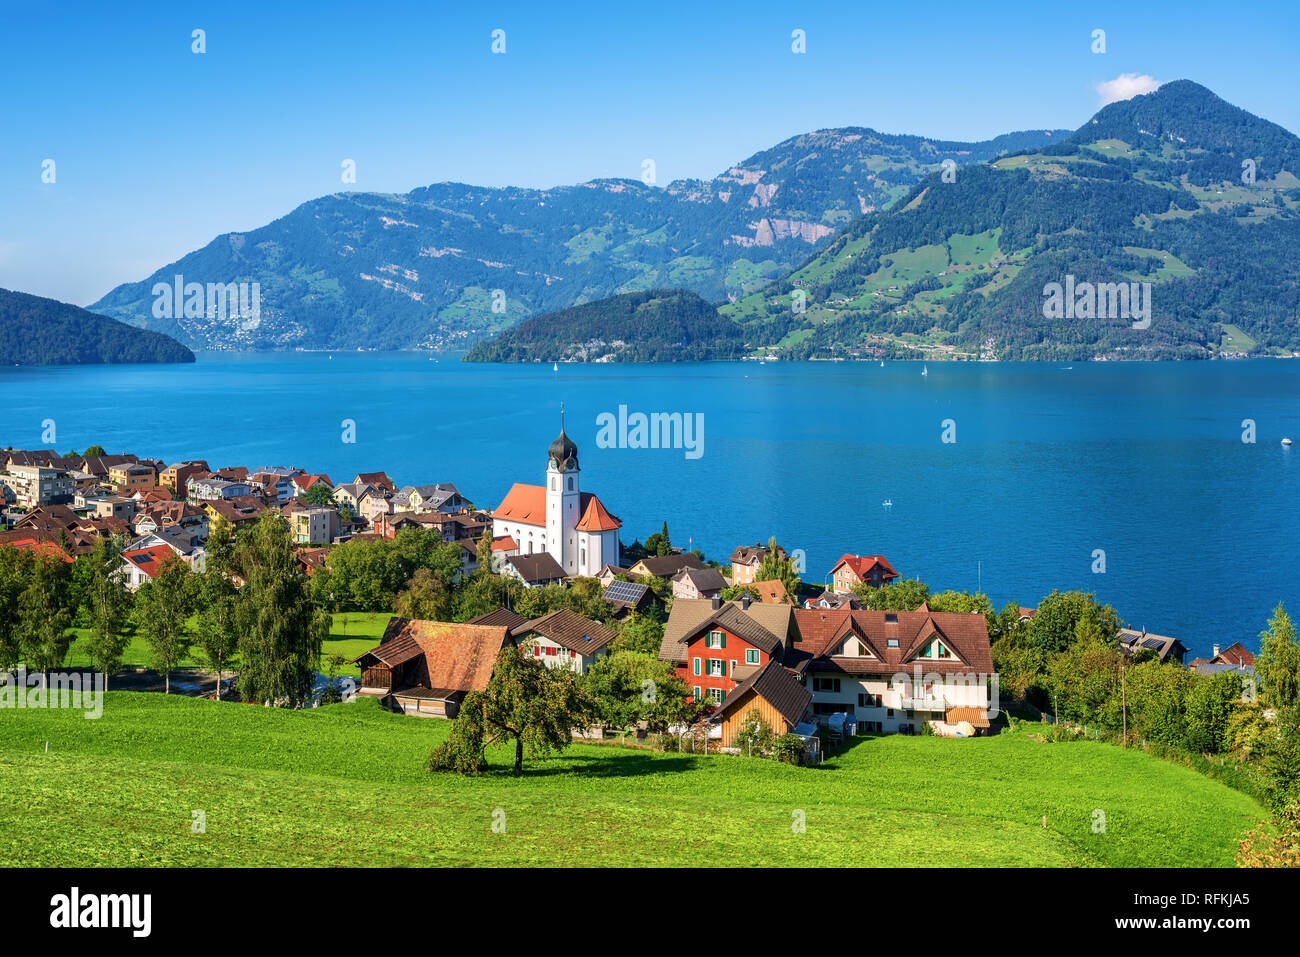 Beckenried, traditional little town on Lake Lucerne in swiss Alps, Switzerland Stock Photo